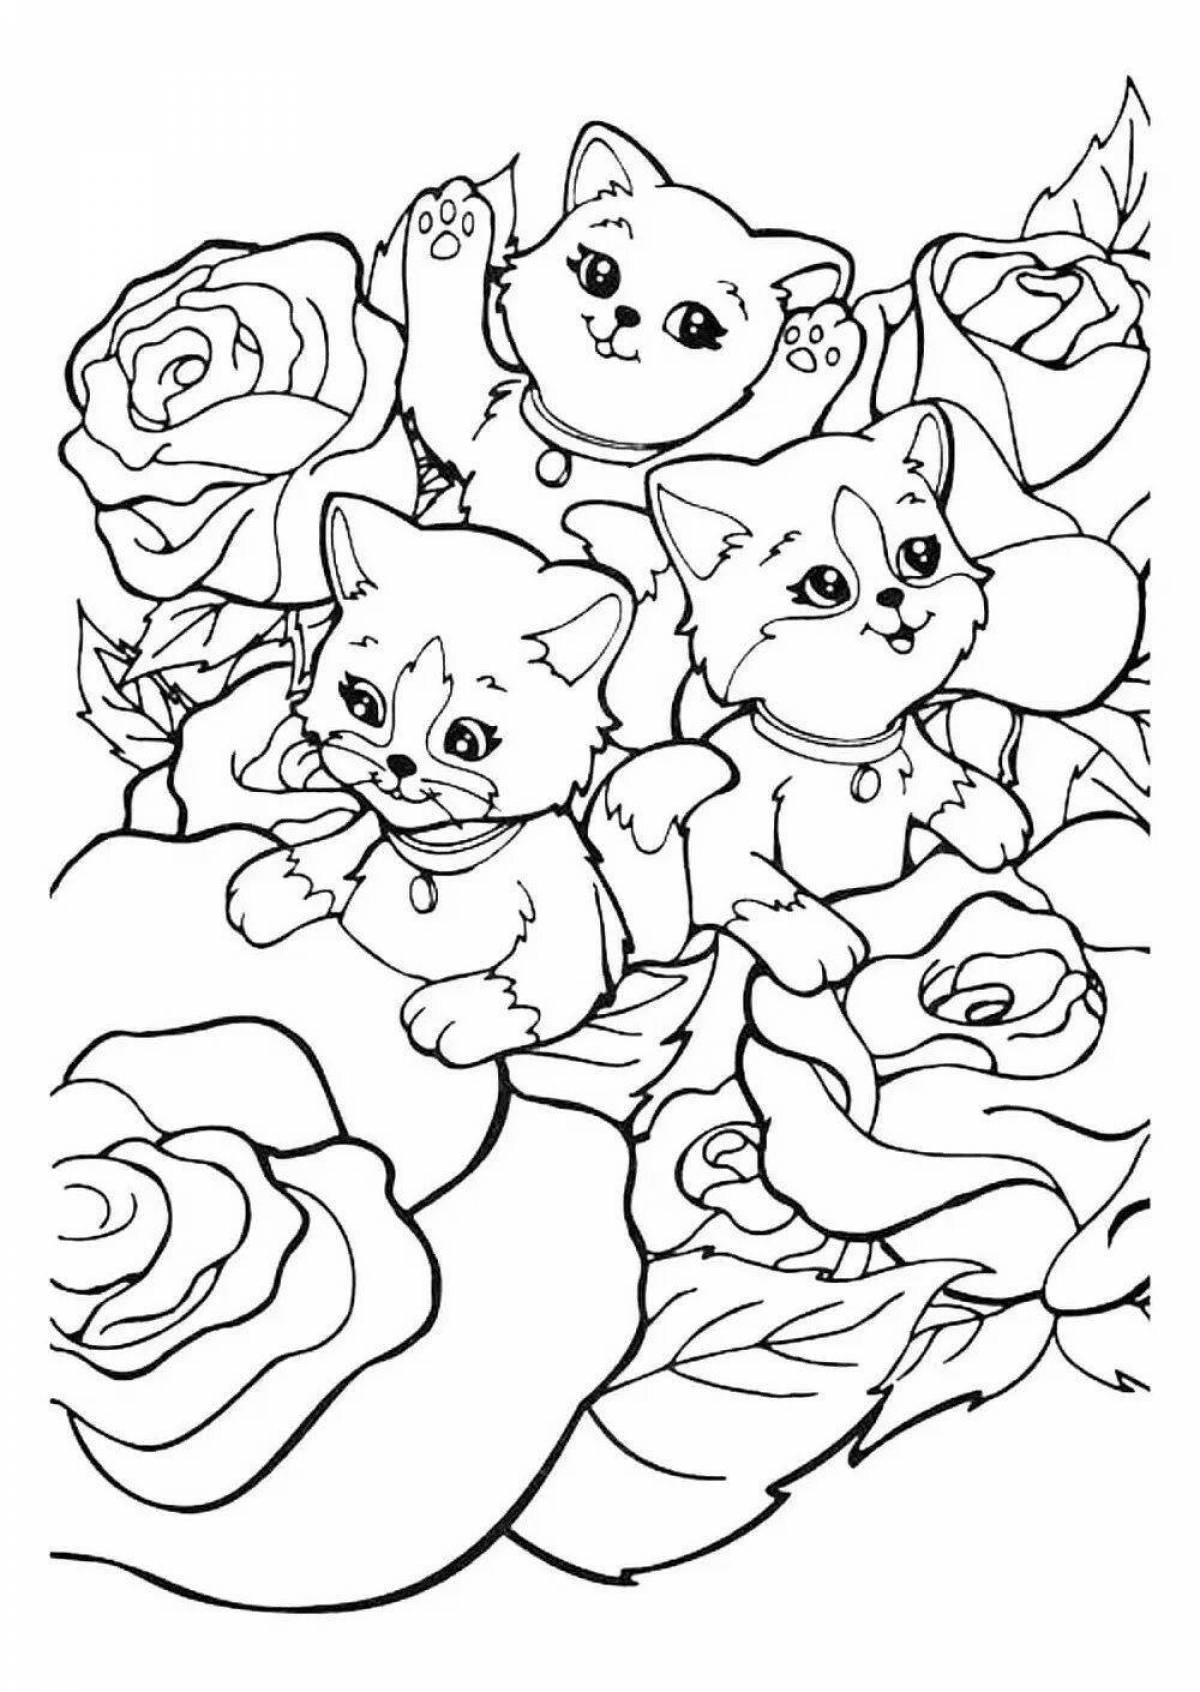 Friendly 3 kittens coloring book